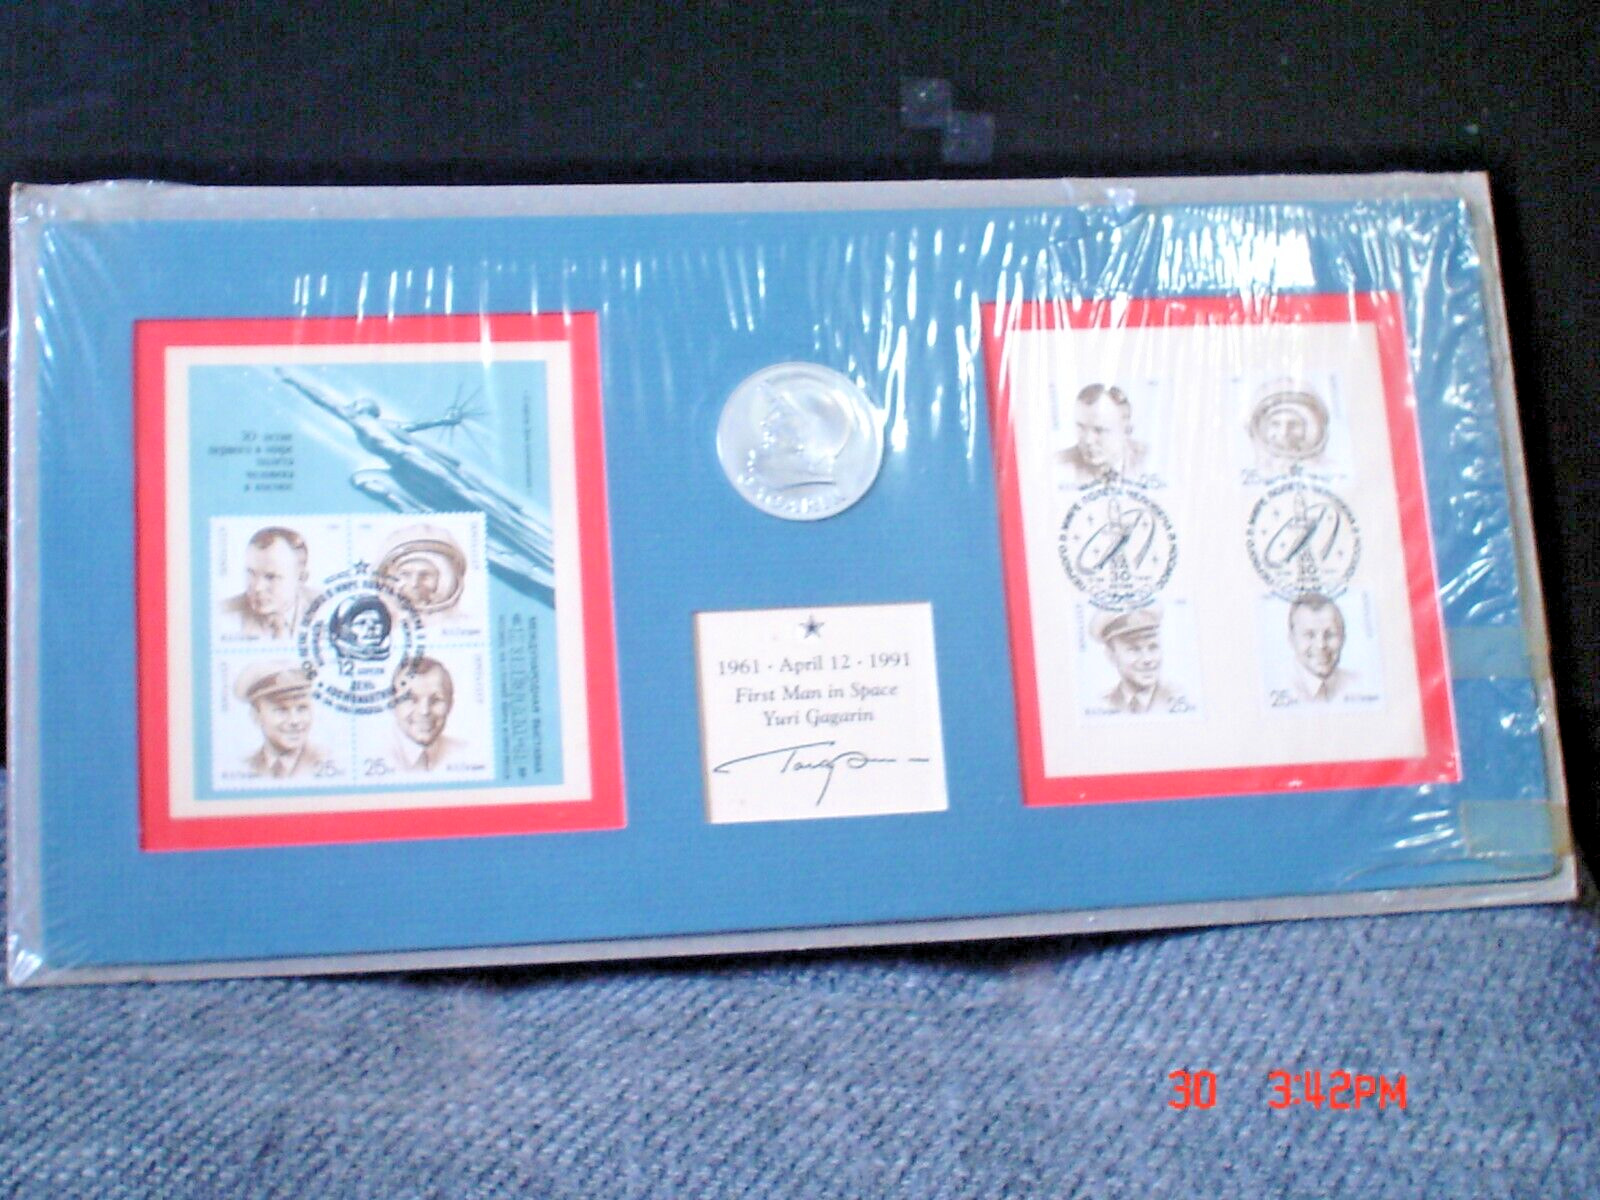 Signed YURI GAGARIN 1961-1991 *First Man in Space* w/Medallion & (8) Stamps NrMt